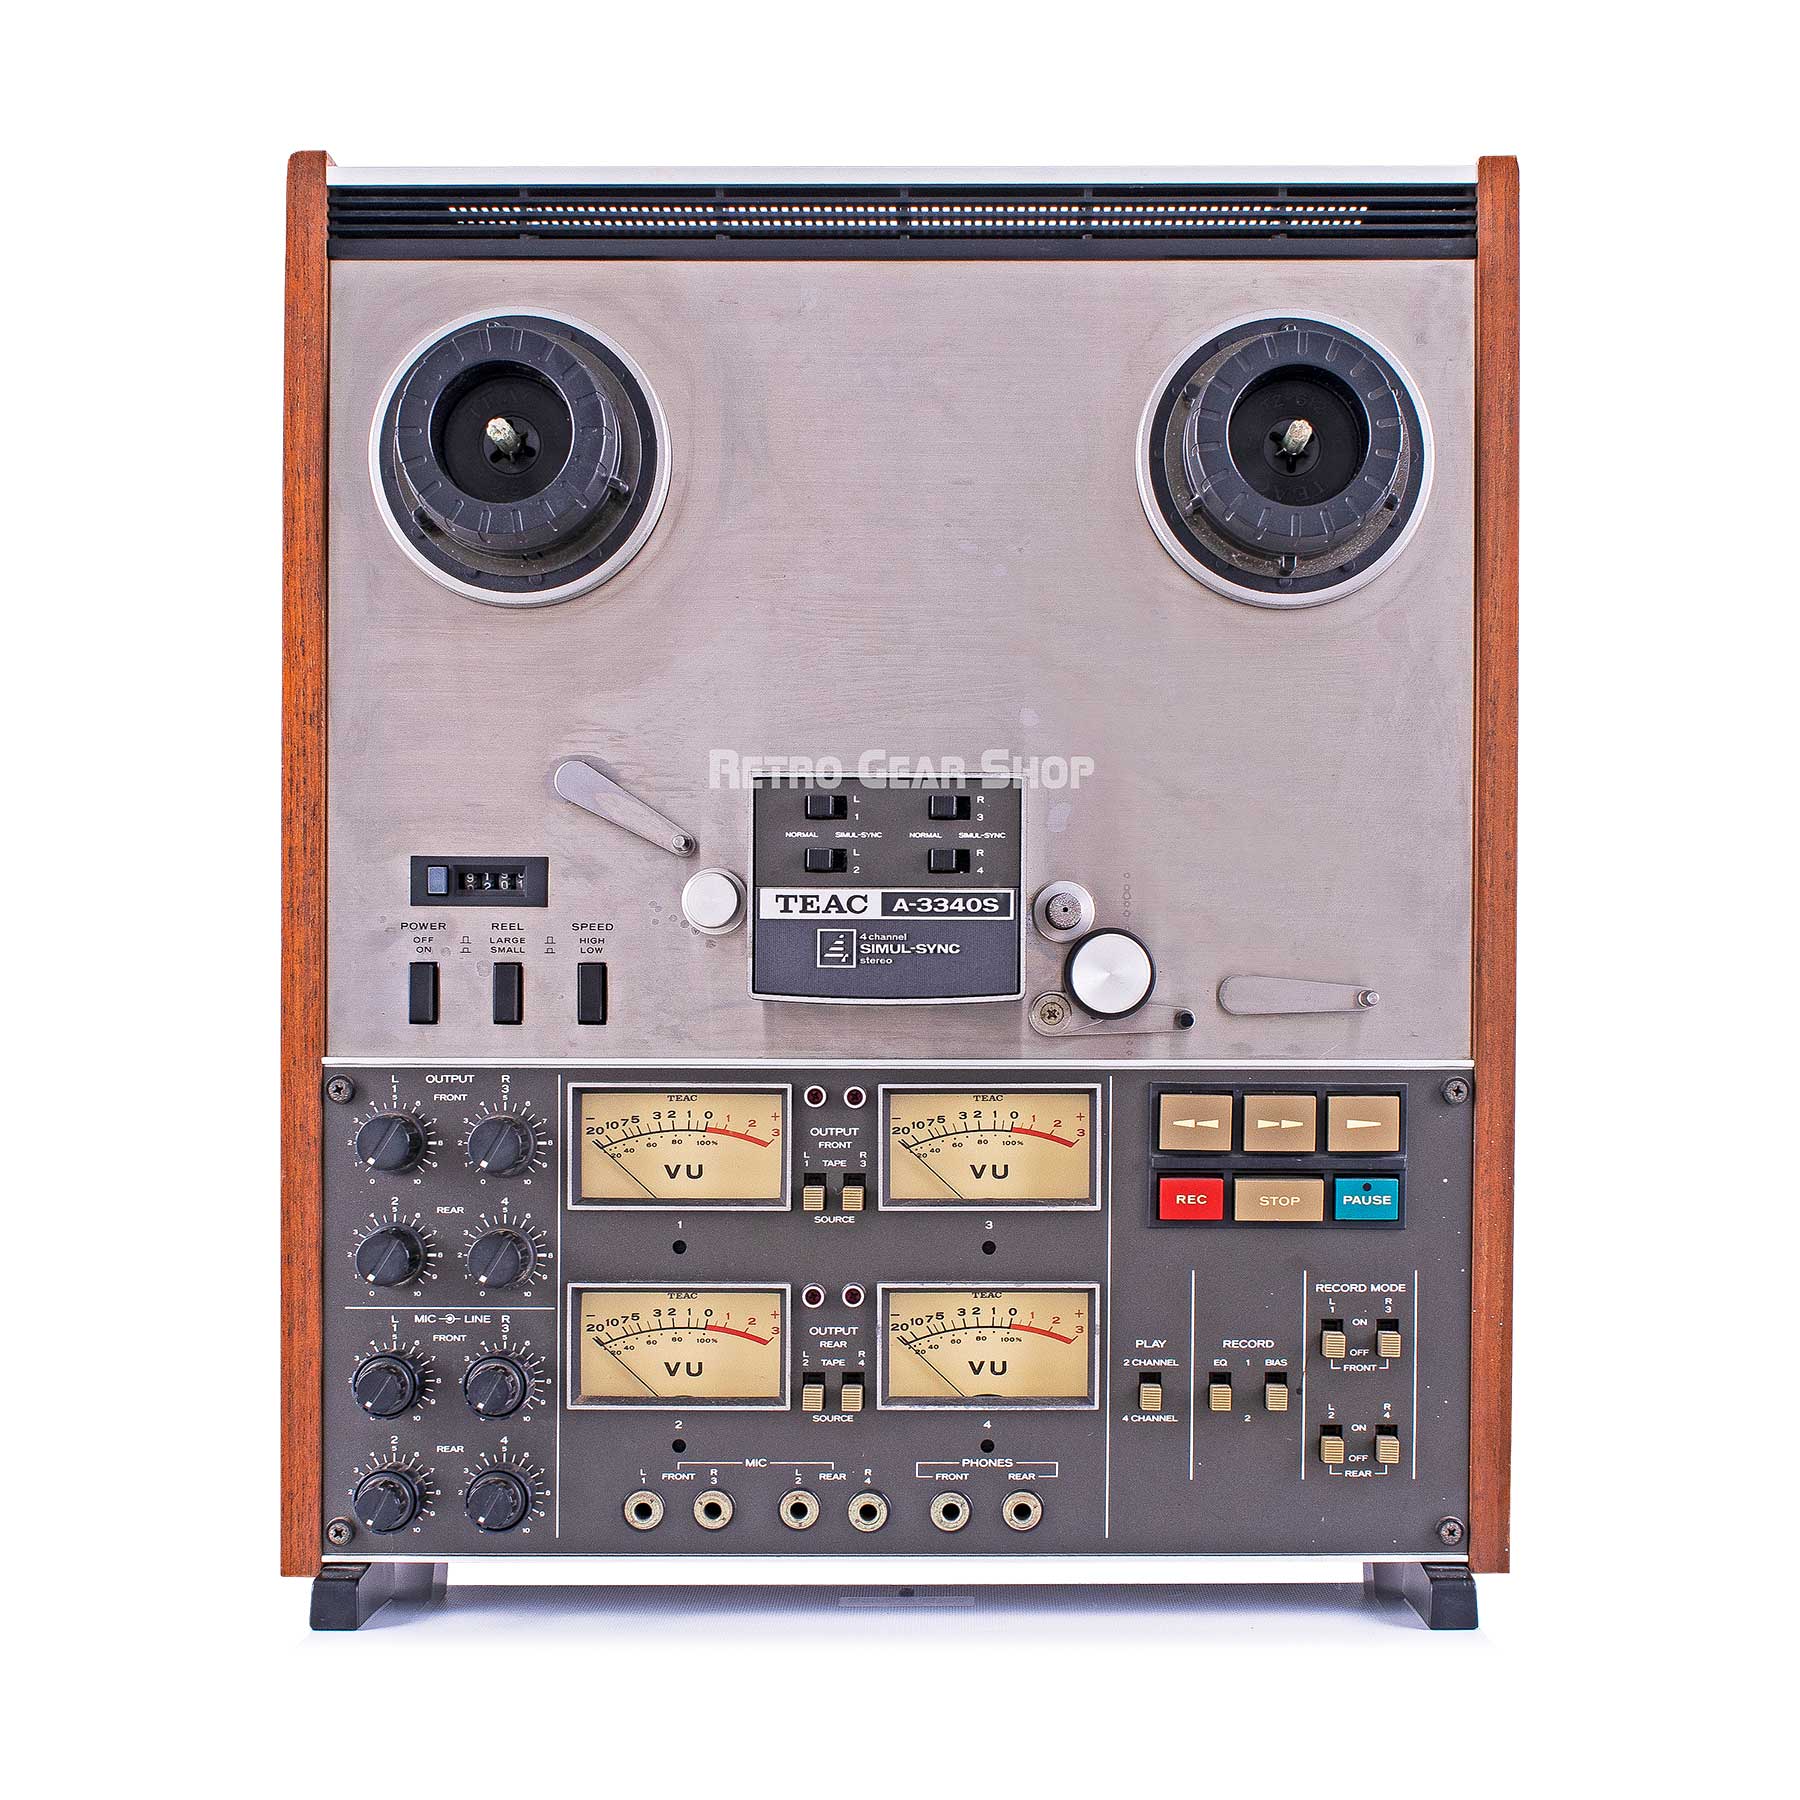 https://retrogearshop.com/cdn/shop/files/0.-Teac-A-3340S-4-Channel-Simul-Sync-Stereo-Tape-Deck-Reel-to-Reel-Tape-Recorder-Vintage-Rare-346787.jpg?v=1695333314&width=1920